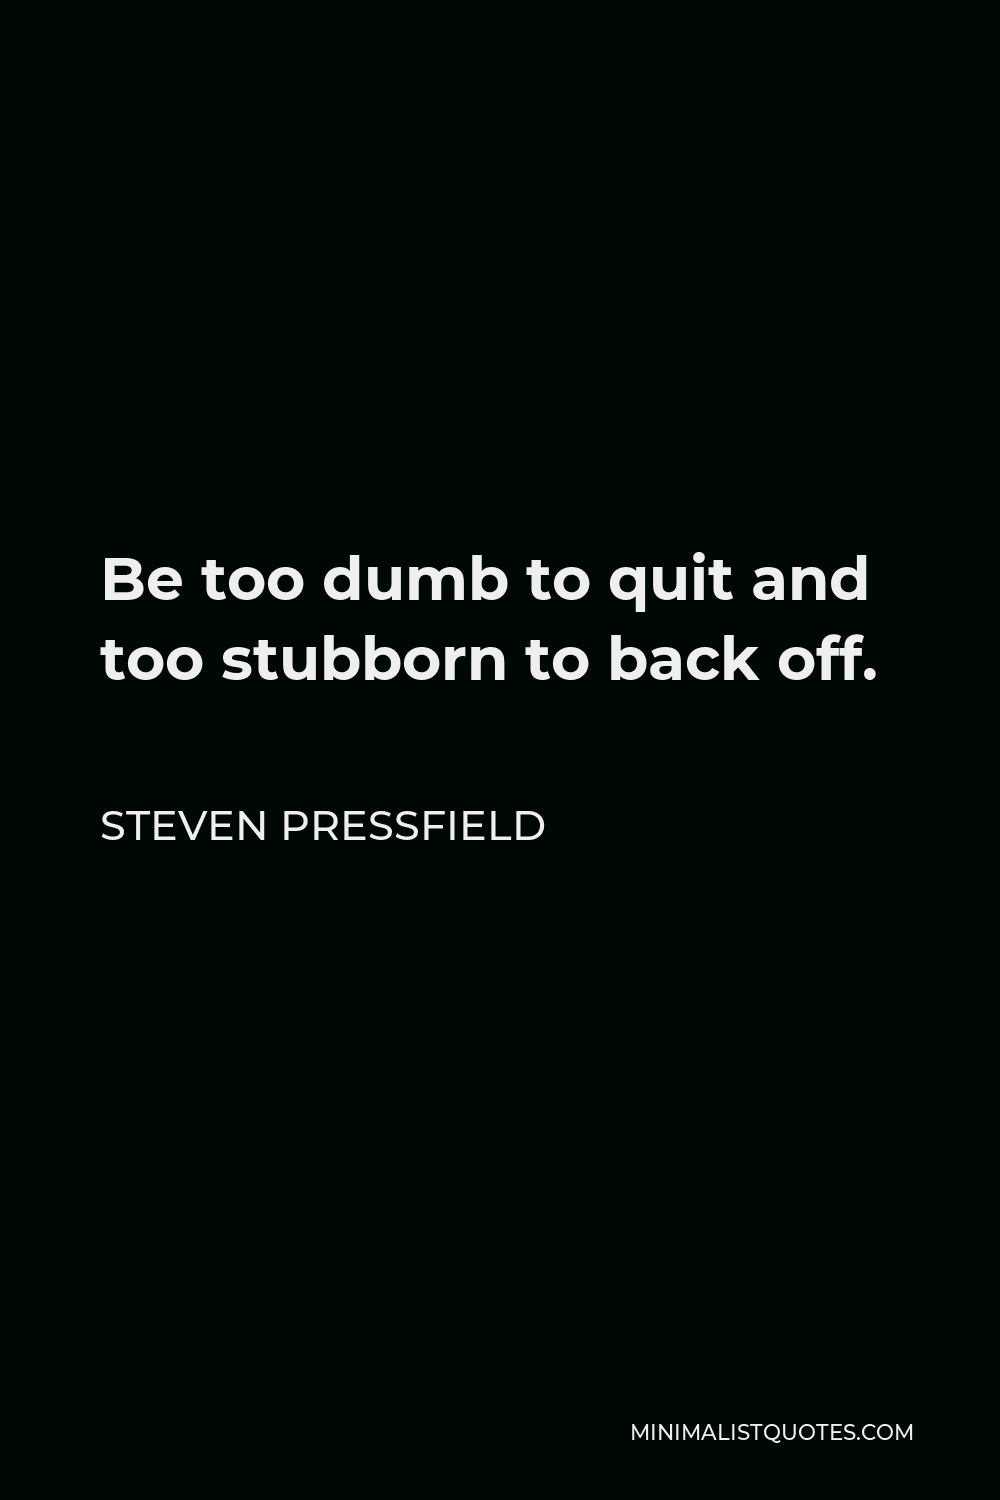 Steven Pressfield Quote - Be too dumb to quit and too stubborn to back off.